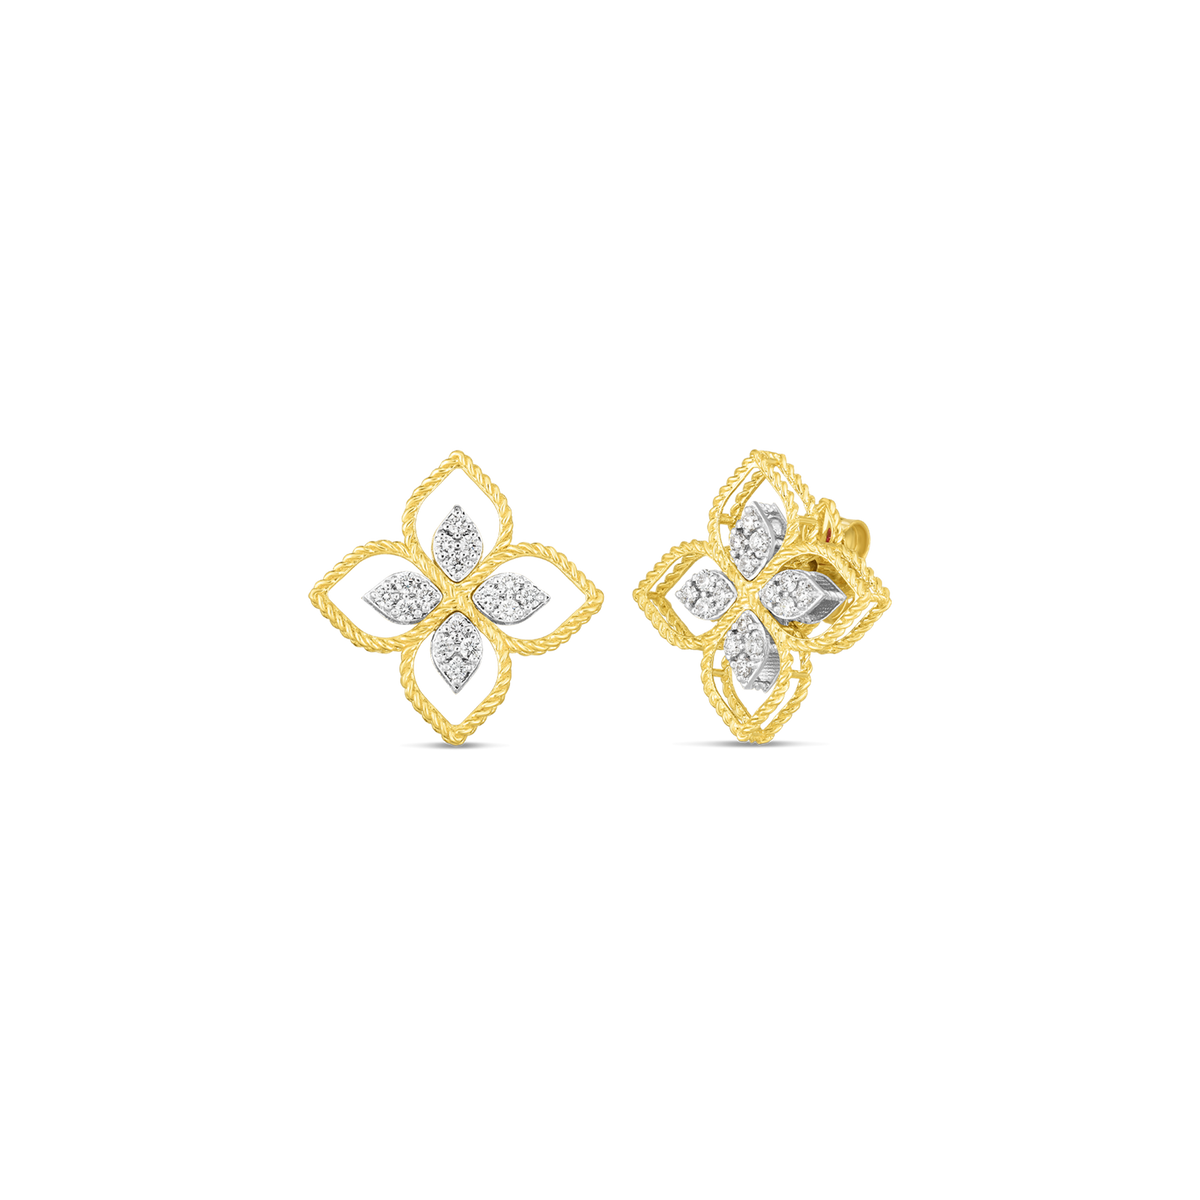 Roberto Coin 18Kt Yellow and White Gold Principessa Stud Flower Earrings with .35cttw Natural Diamonds